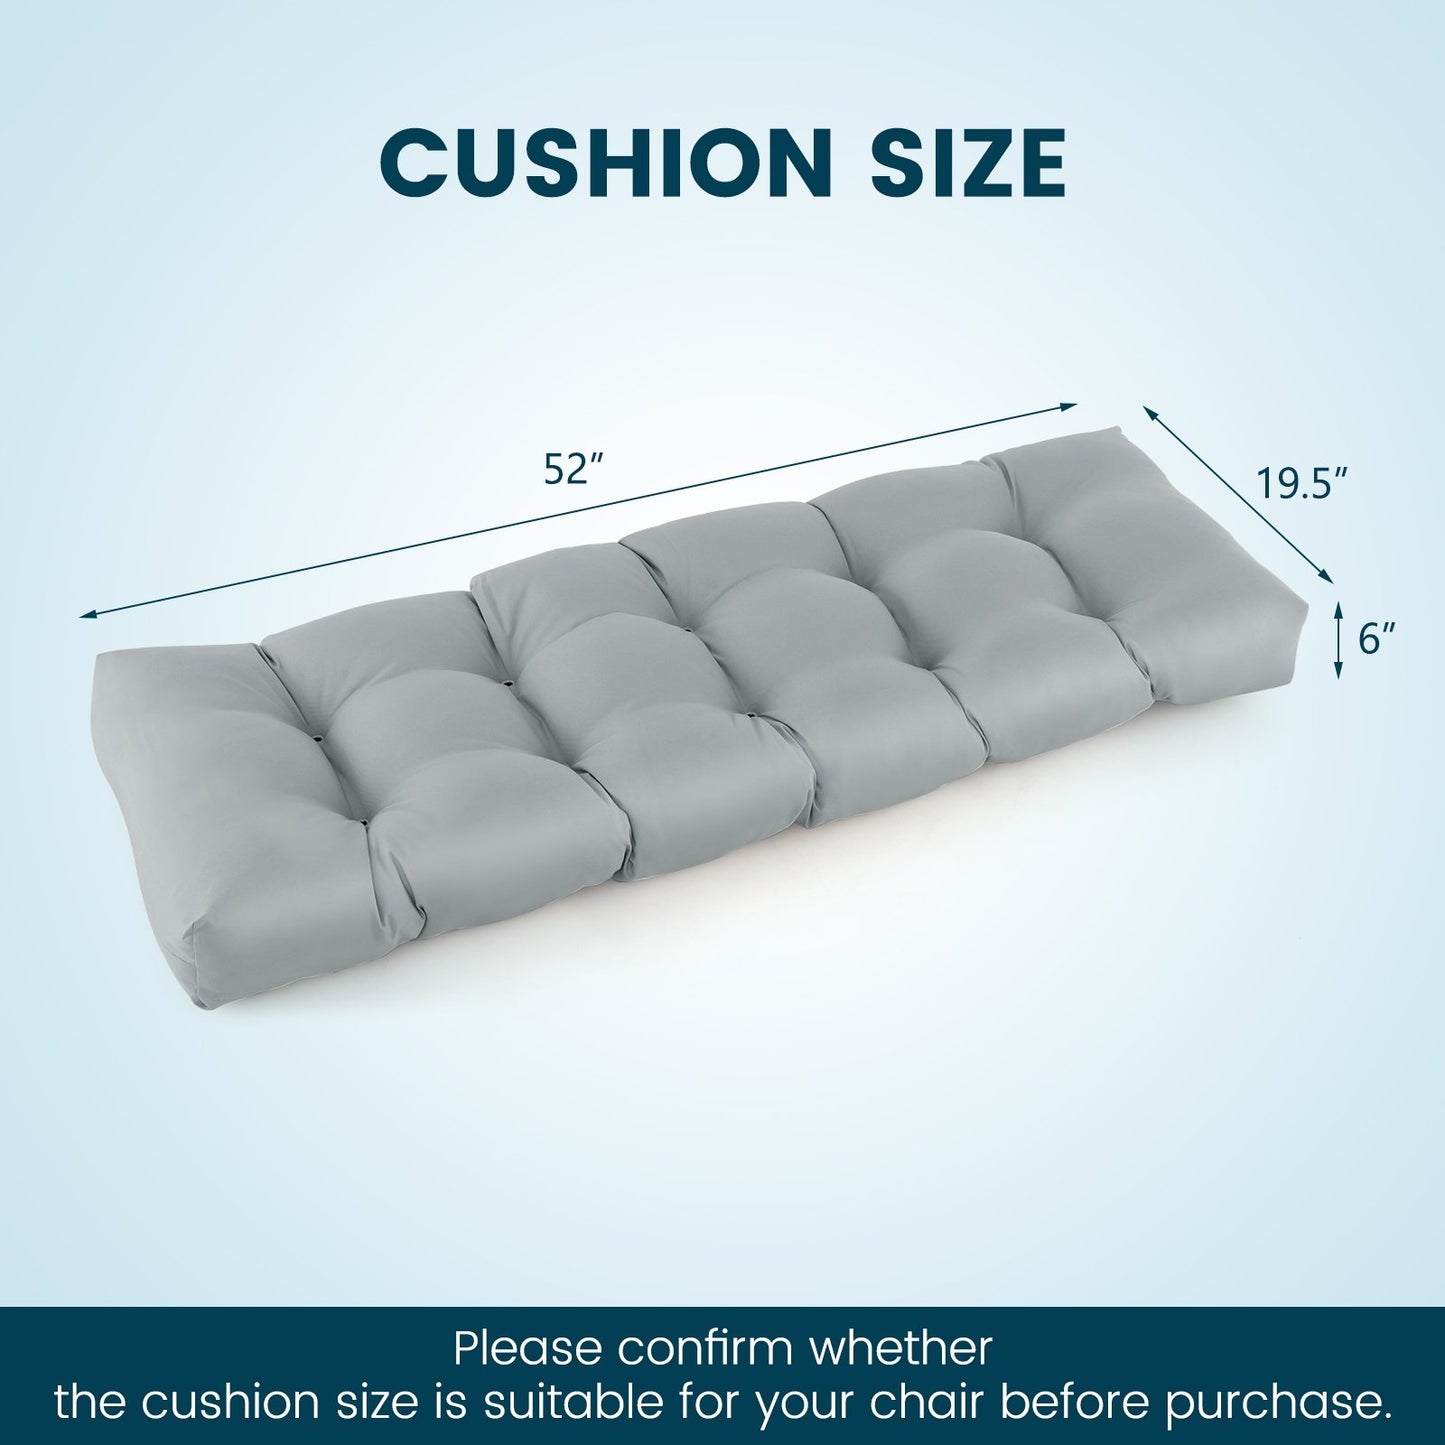 Indoor Outdoor Tufted Bench Cushion with Soft PP Cotton, Gray - Gallery Canada